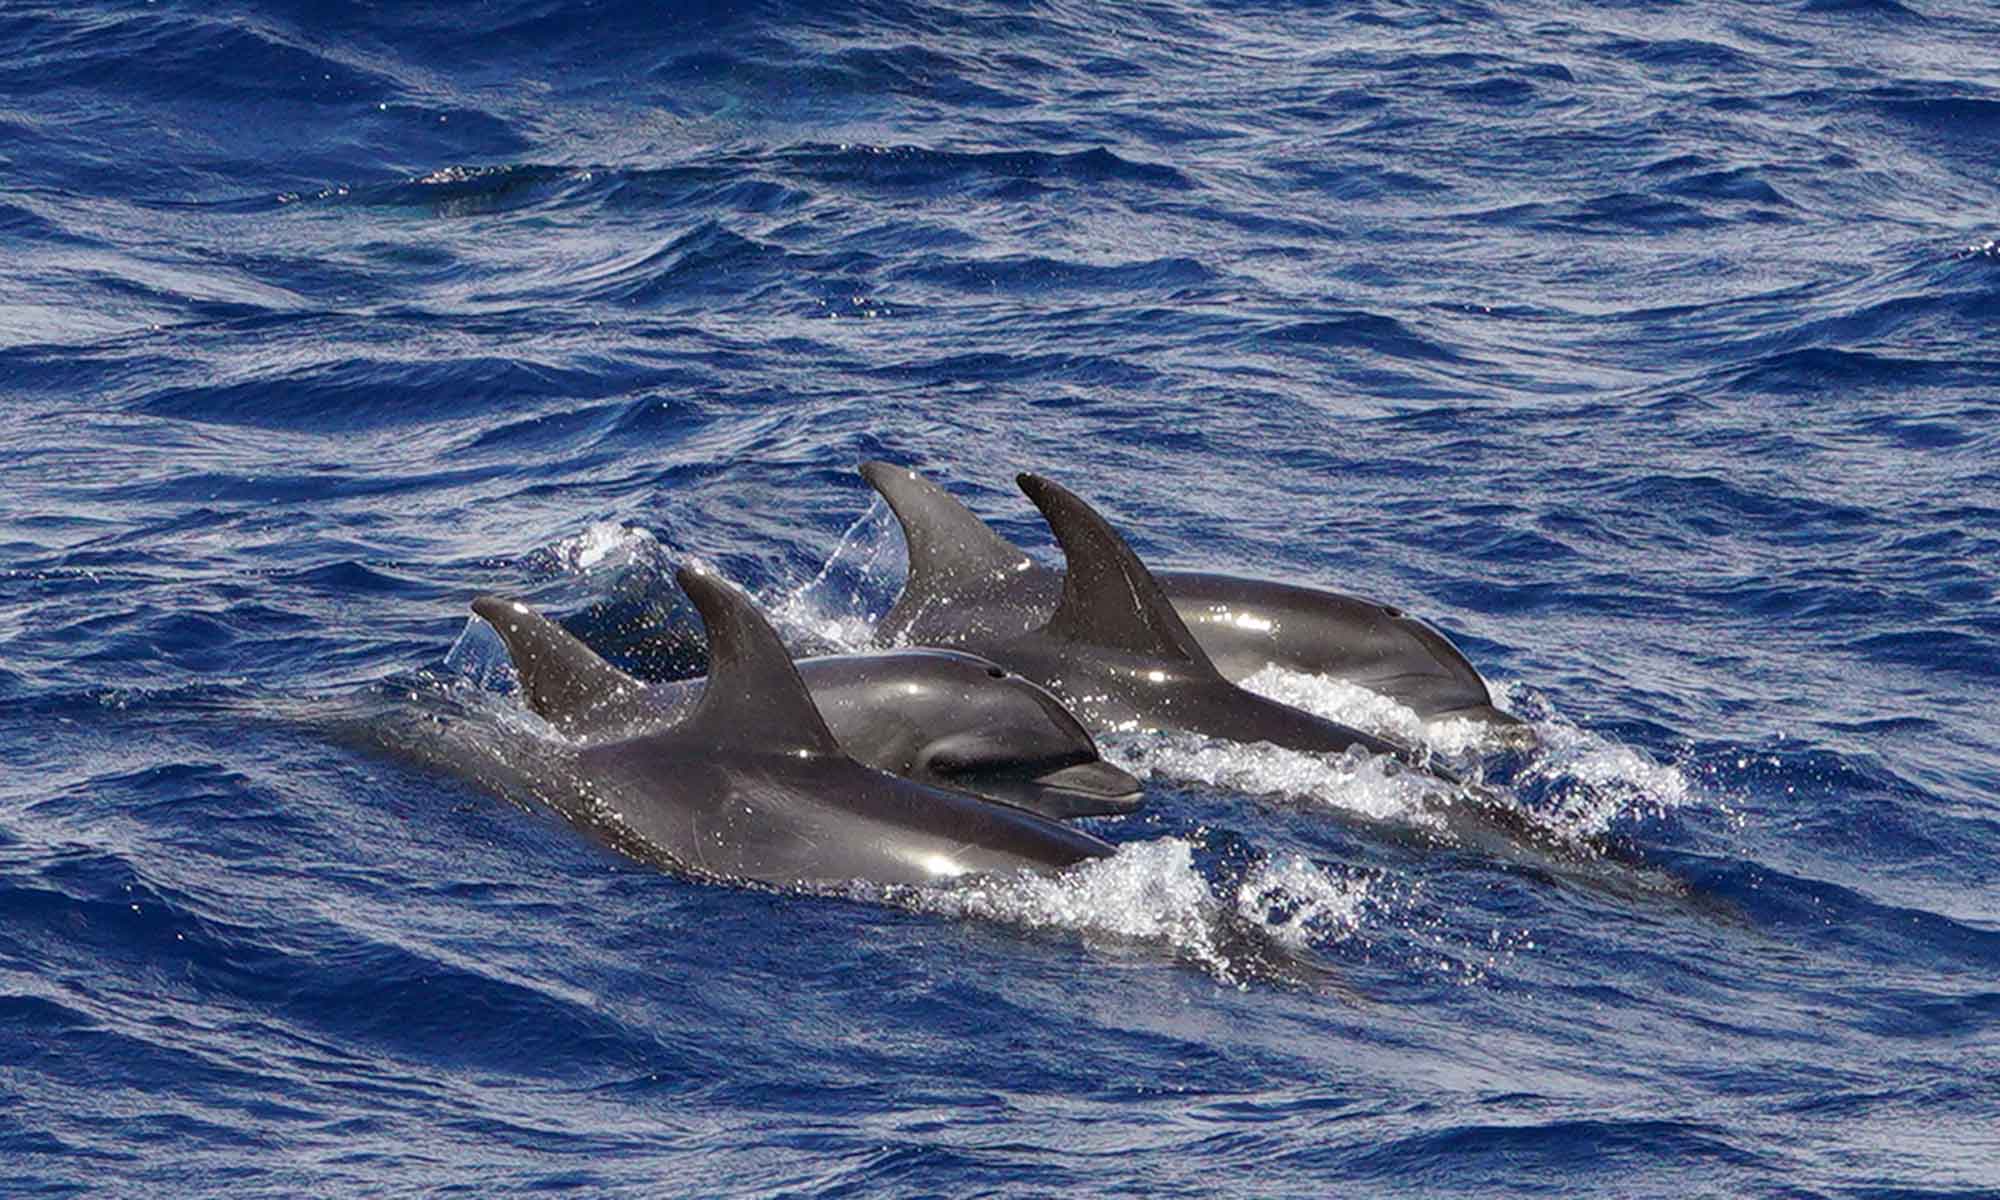 Bottlenose dolphins were commonly seen on dolphin and whale watching trips from Funchal.